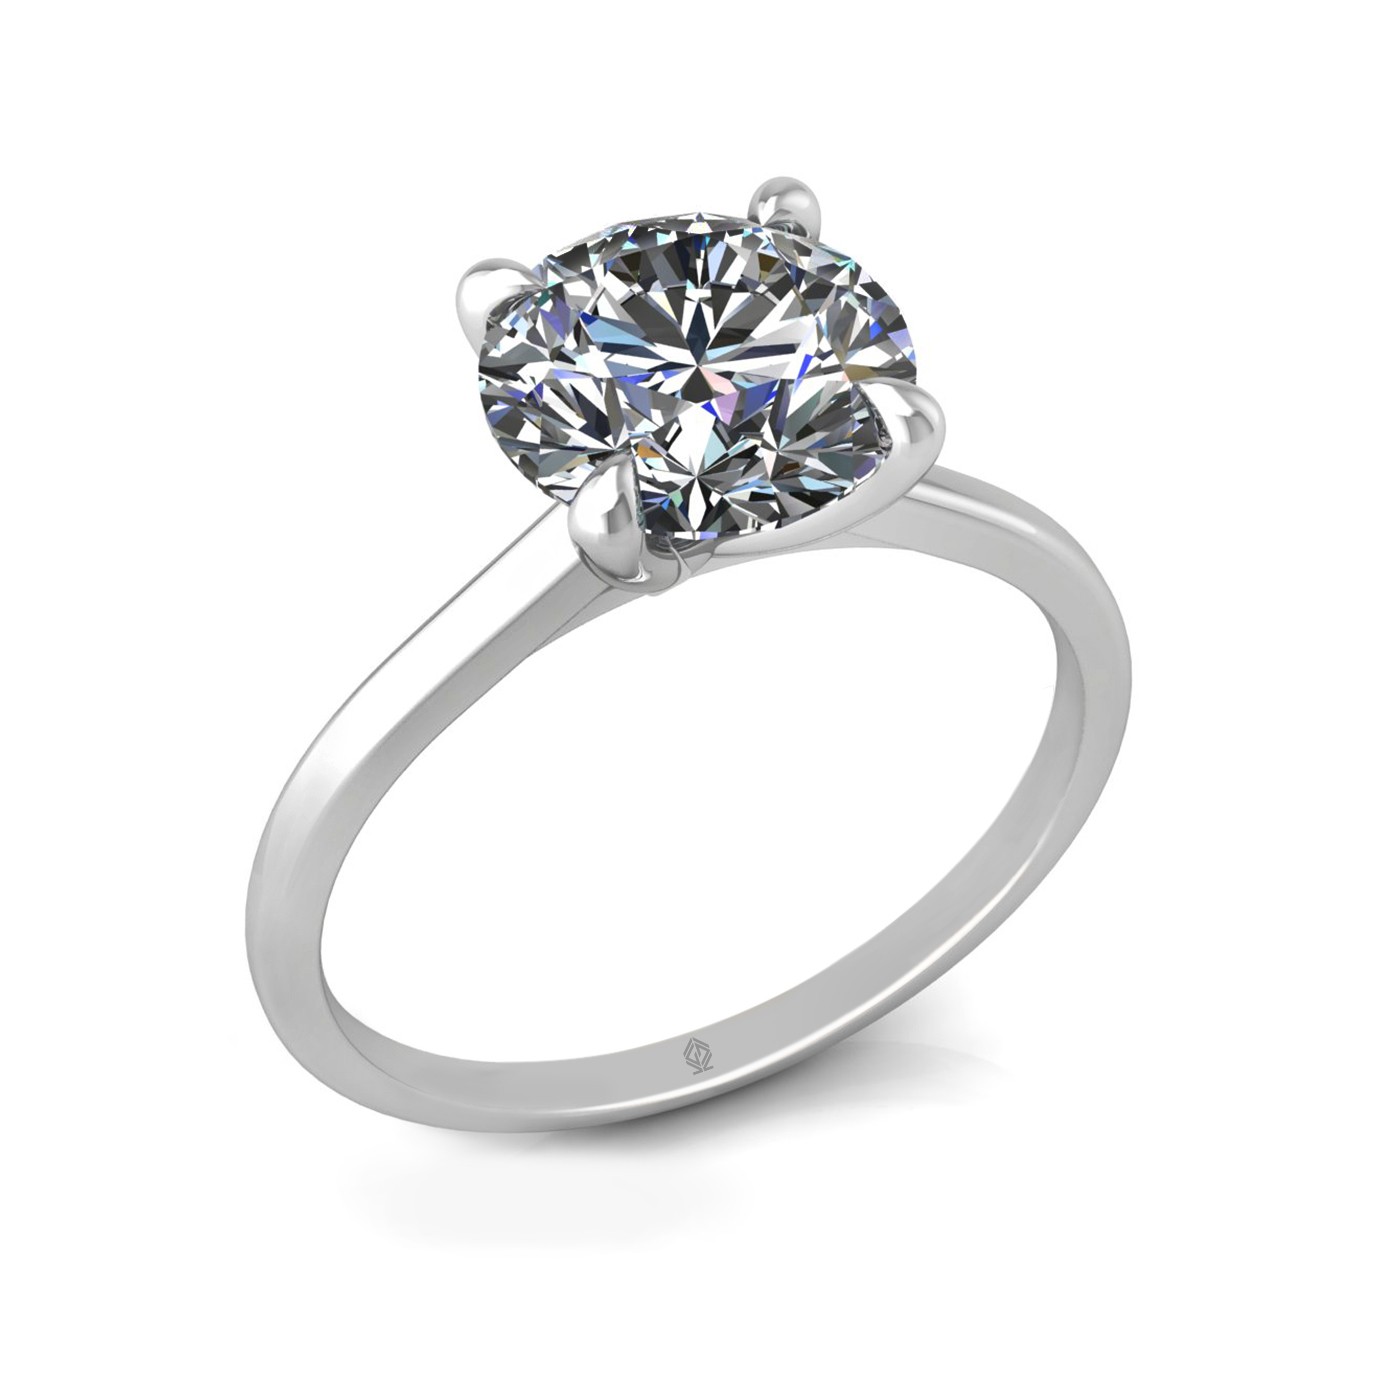 18k white gold 2,00 ct 4 prongs solitaire round cut diamond engagement ring with whisper thin band